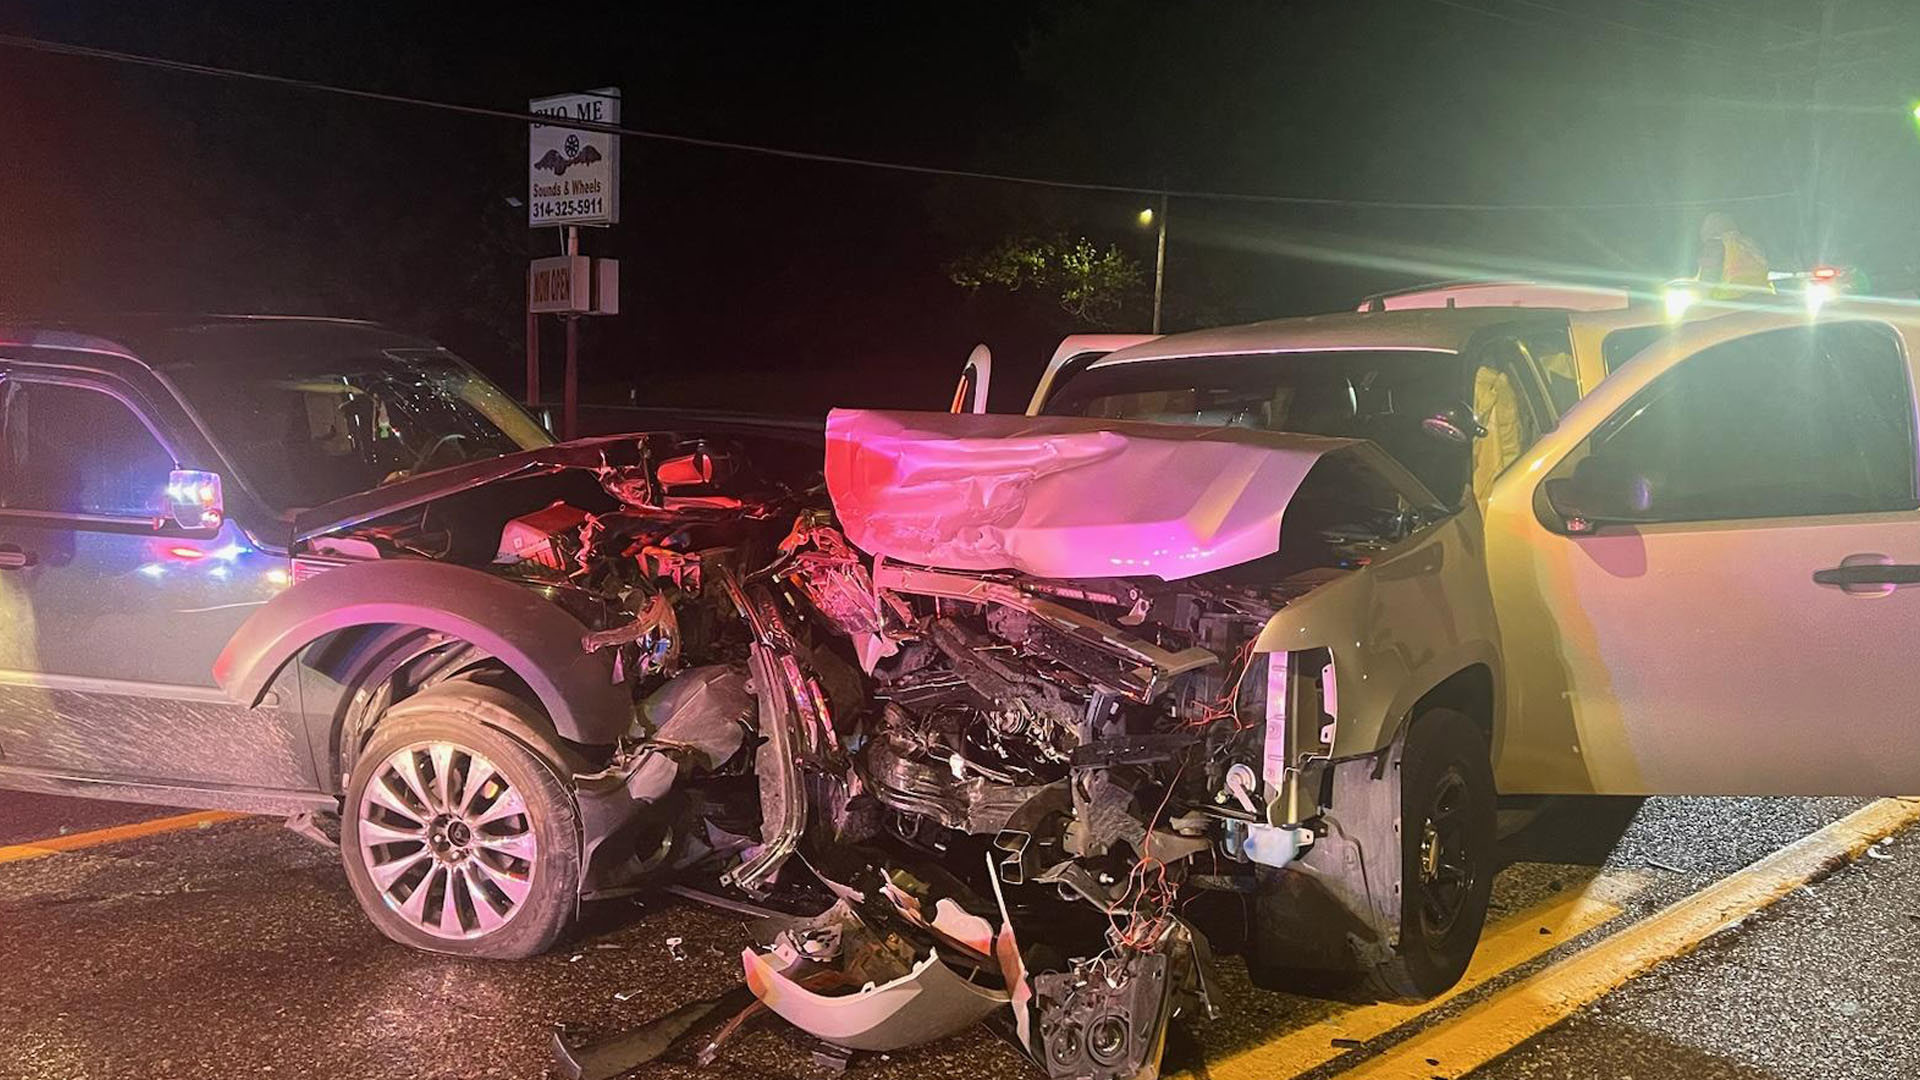 Two officers with the North County Police Cooperative and another driver were injured after colliding head-on. Police released surveillance video of the crash.